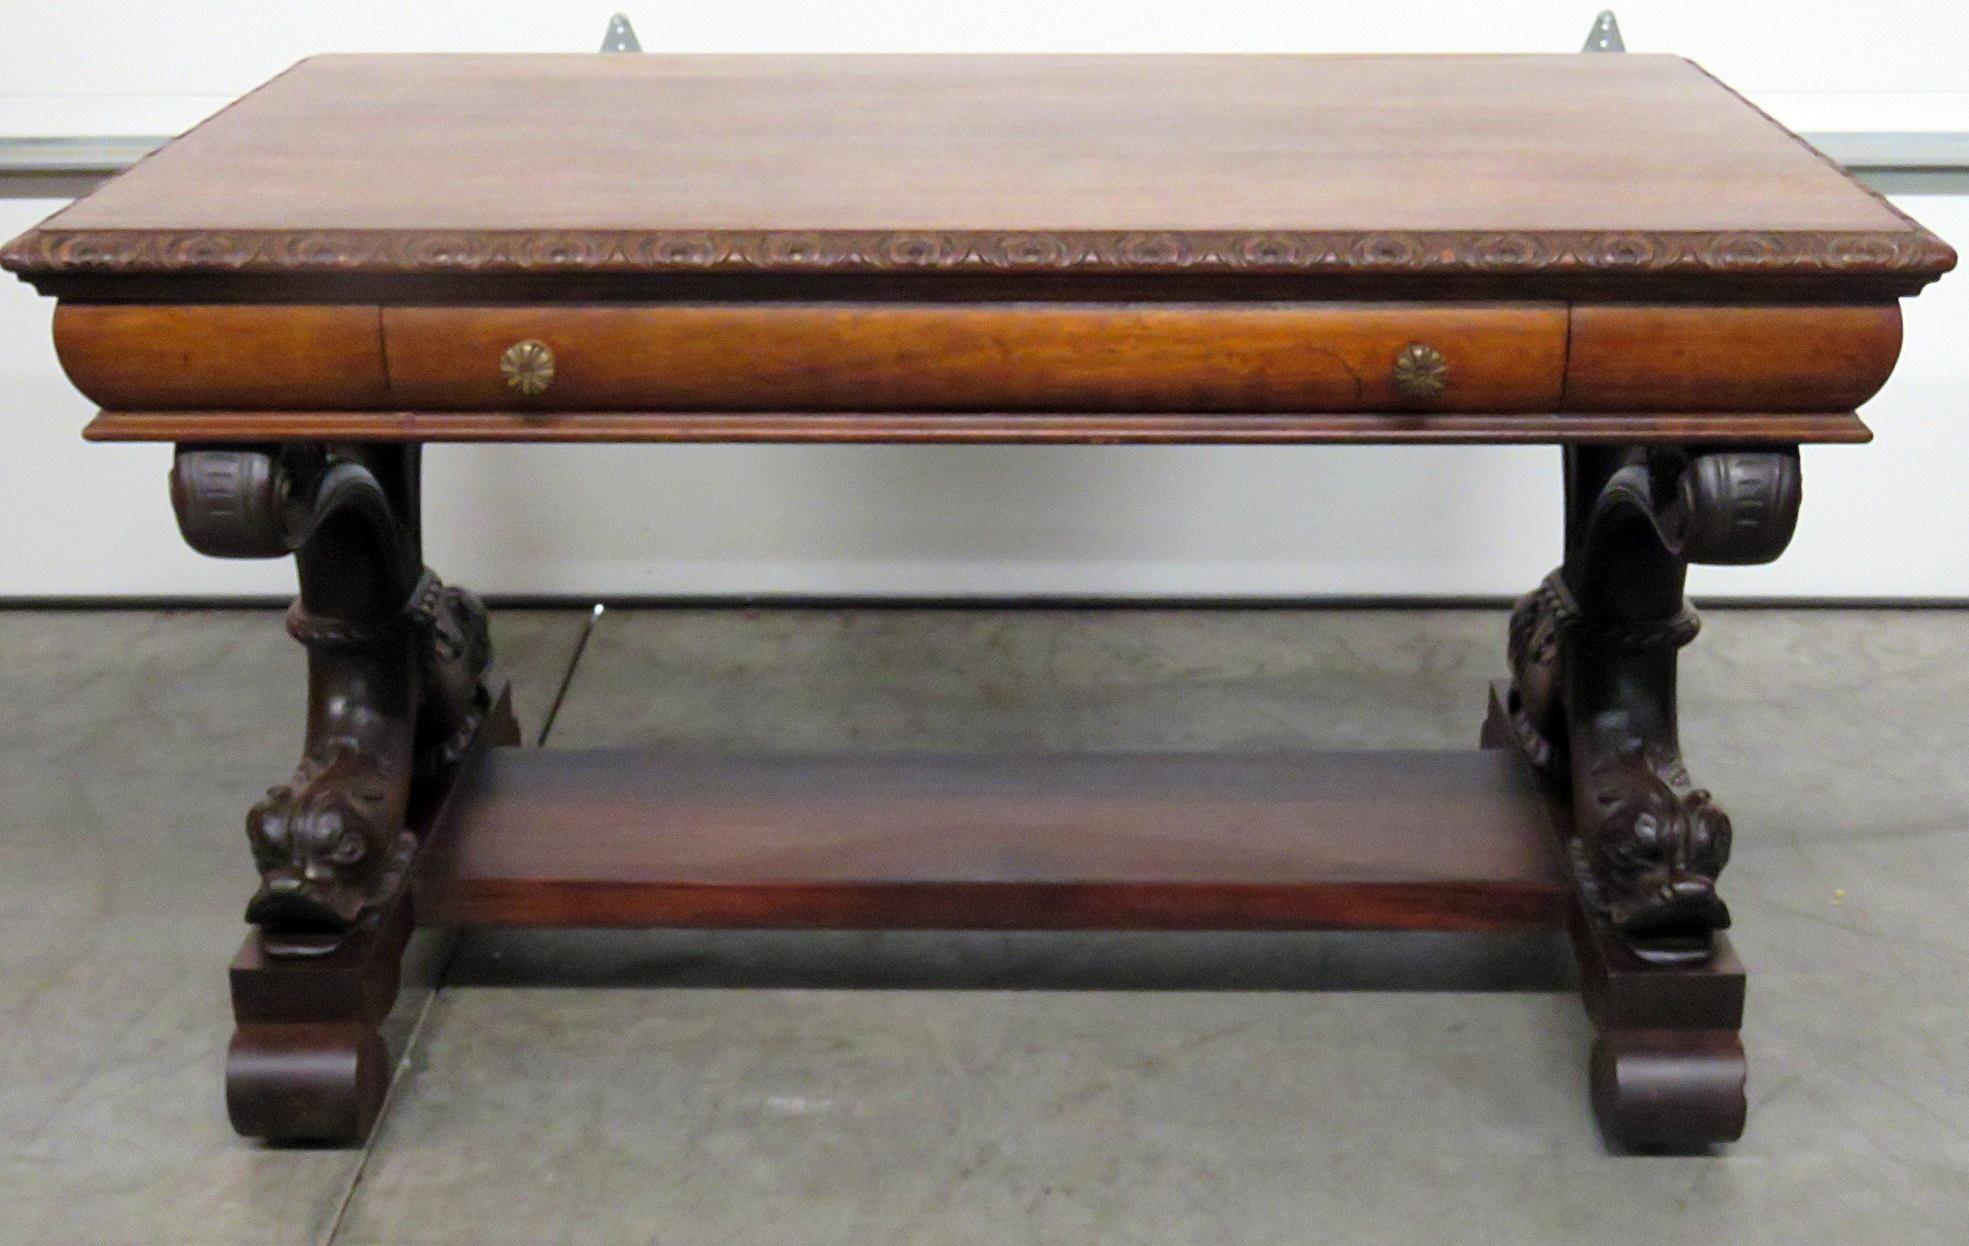 This is a fine RJ Horner style desk. It may even be RJ Horner but is not marked. The desk features two mythical 